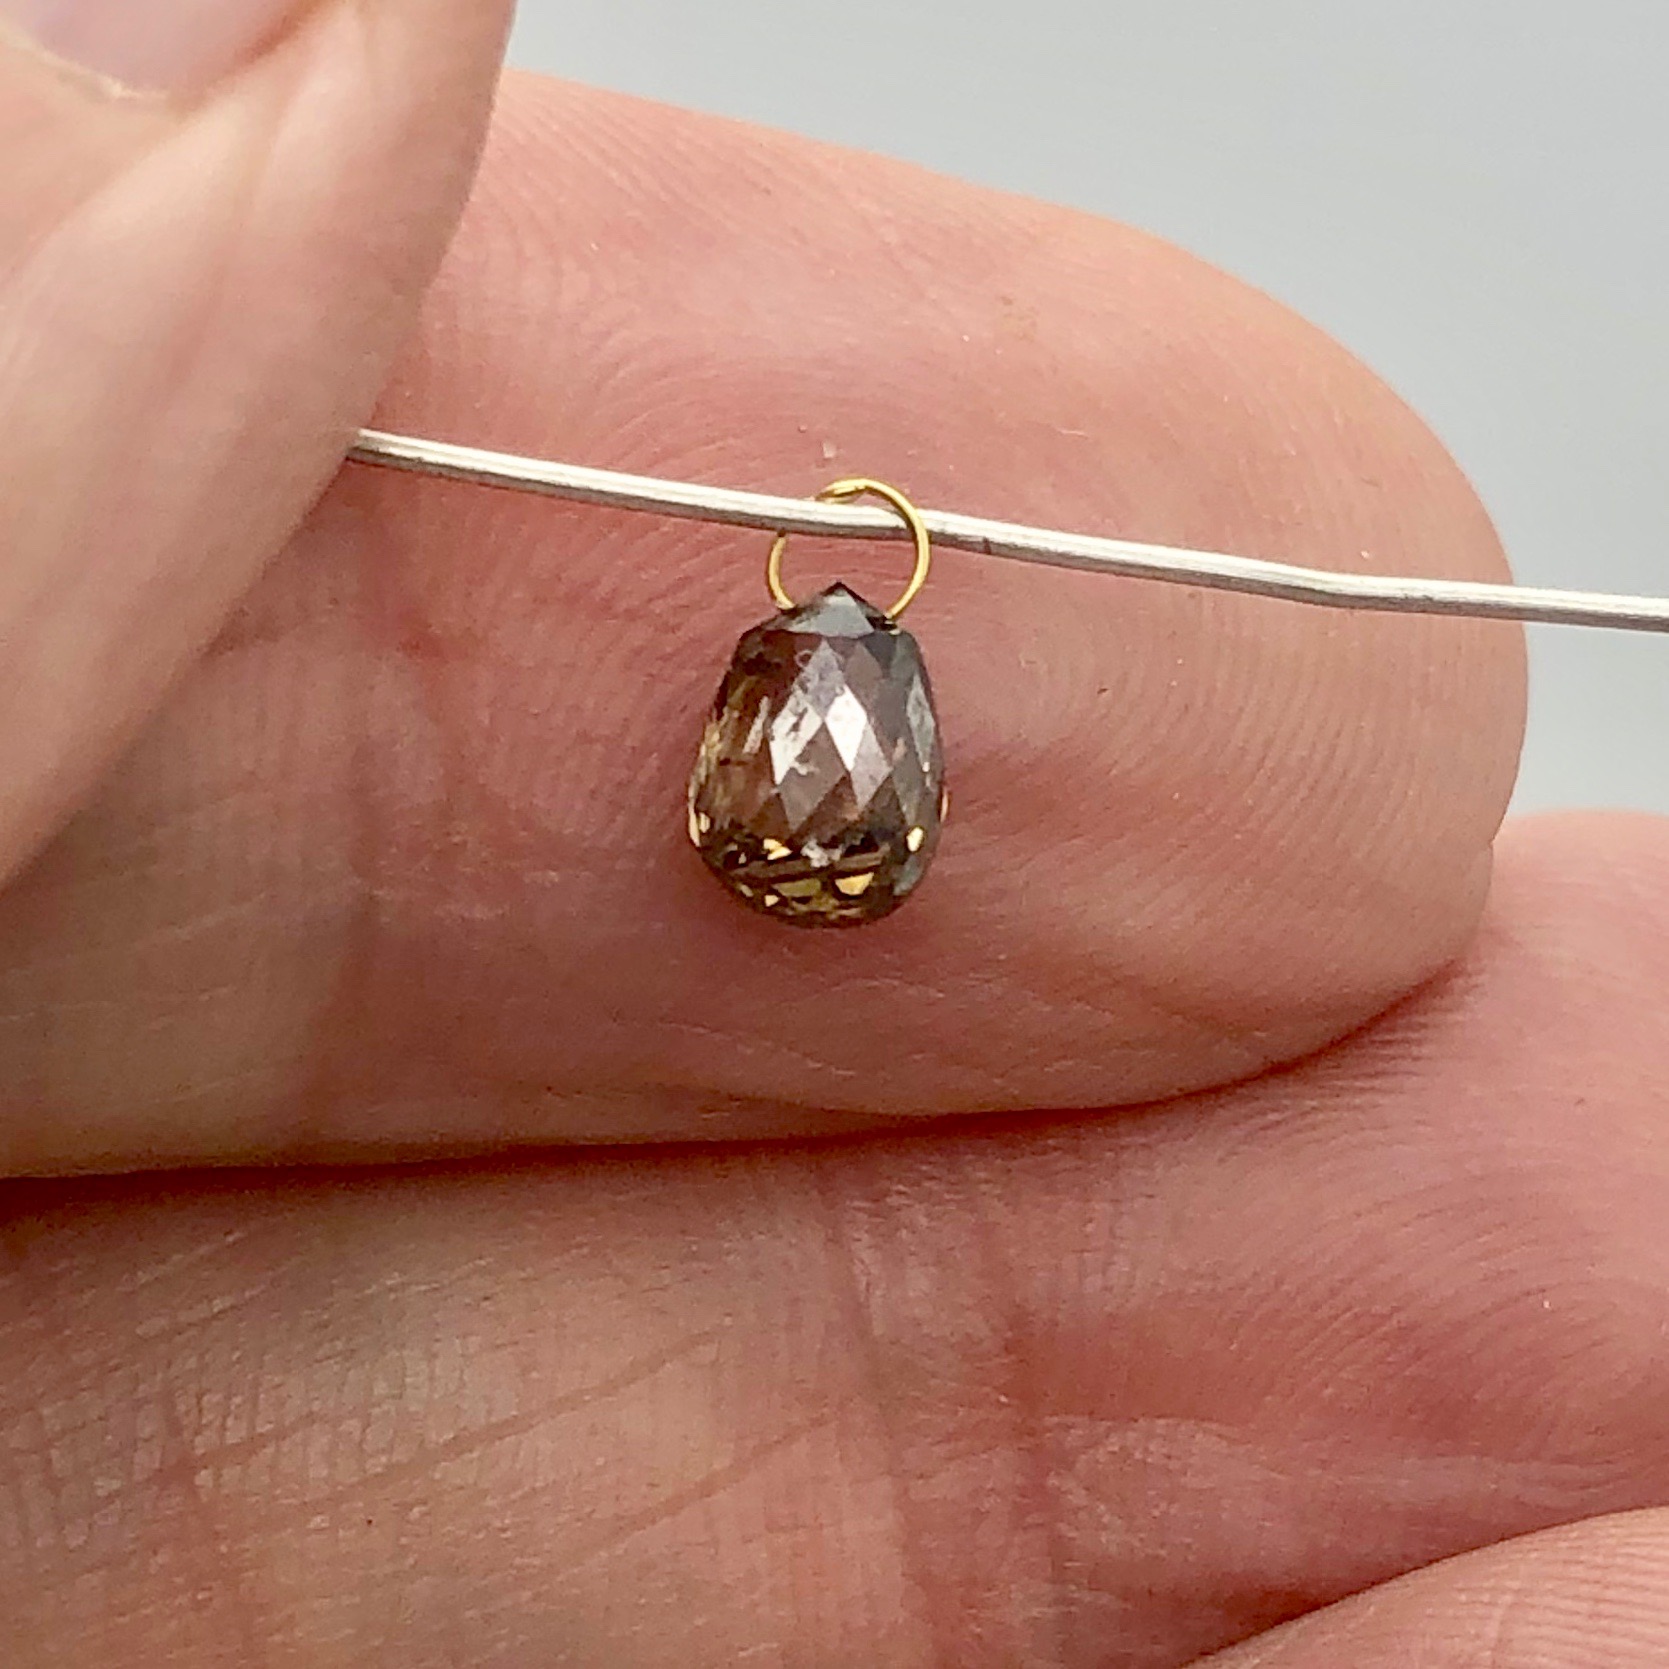 0.82cts Champagne Diamond Briolette 18K Pendant | 6x4.5x3mm and 3mm loop | - image 2 of 11